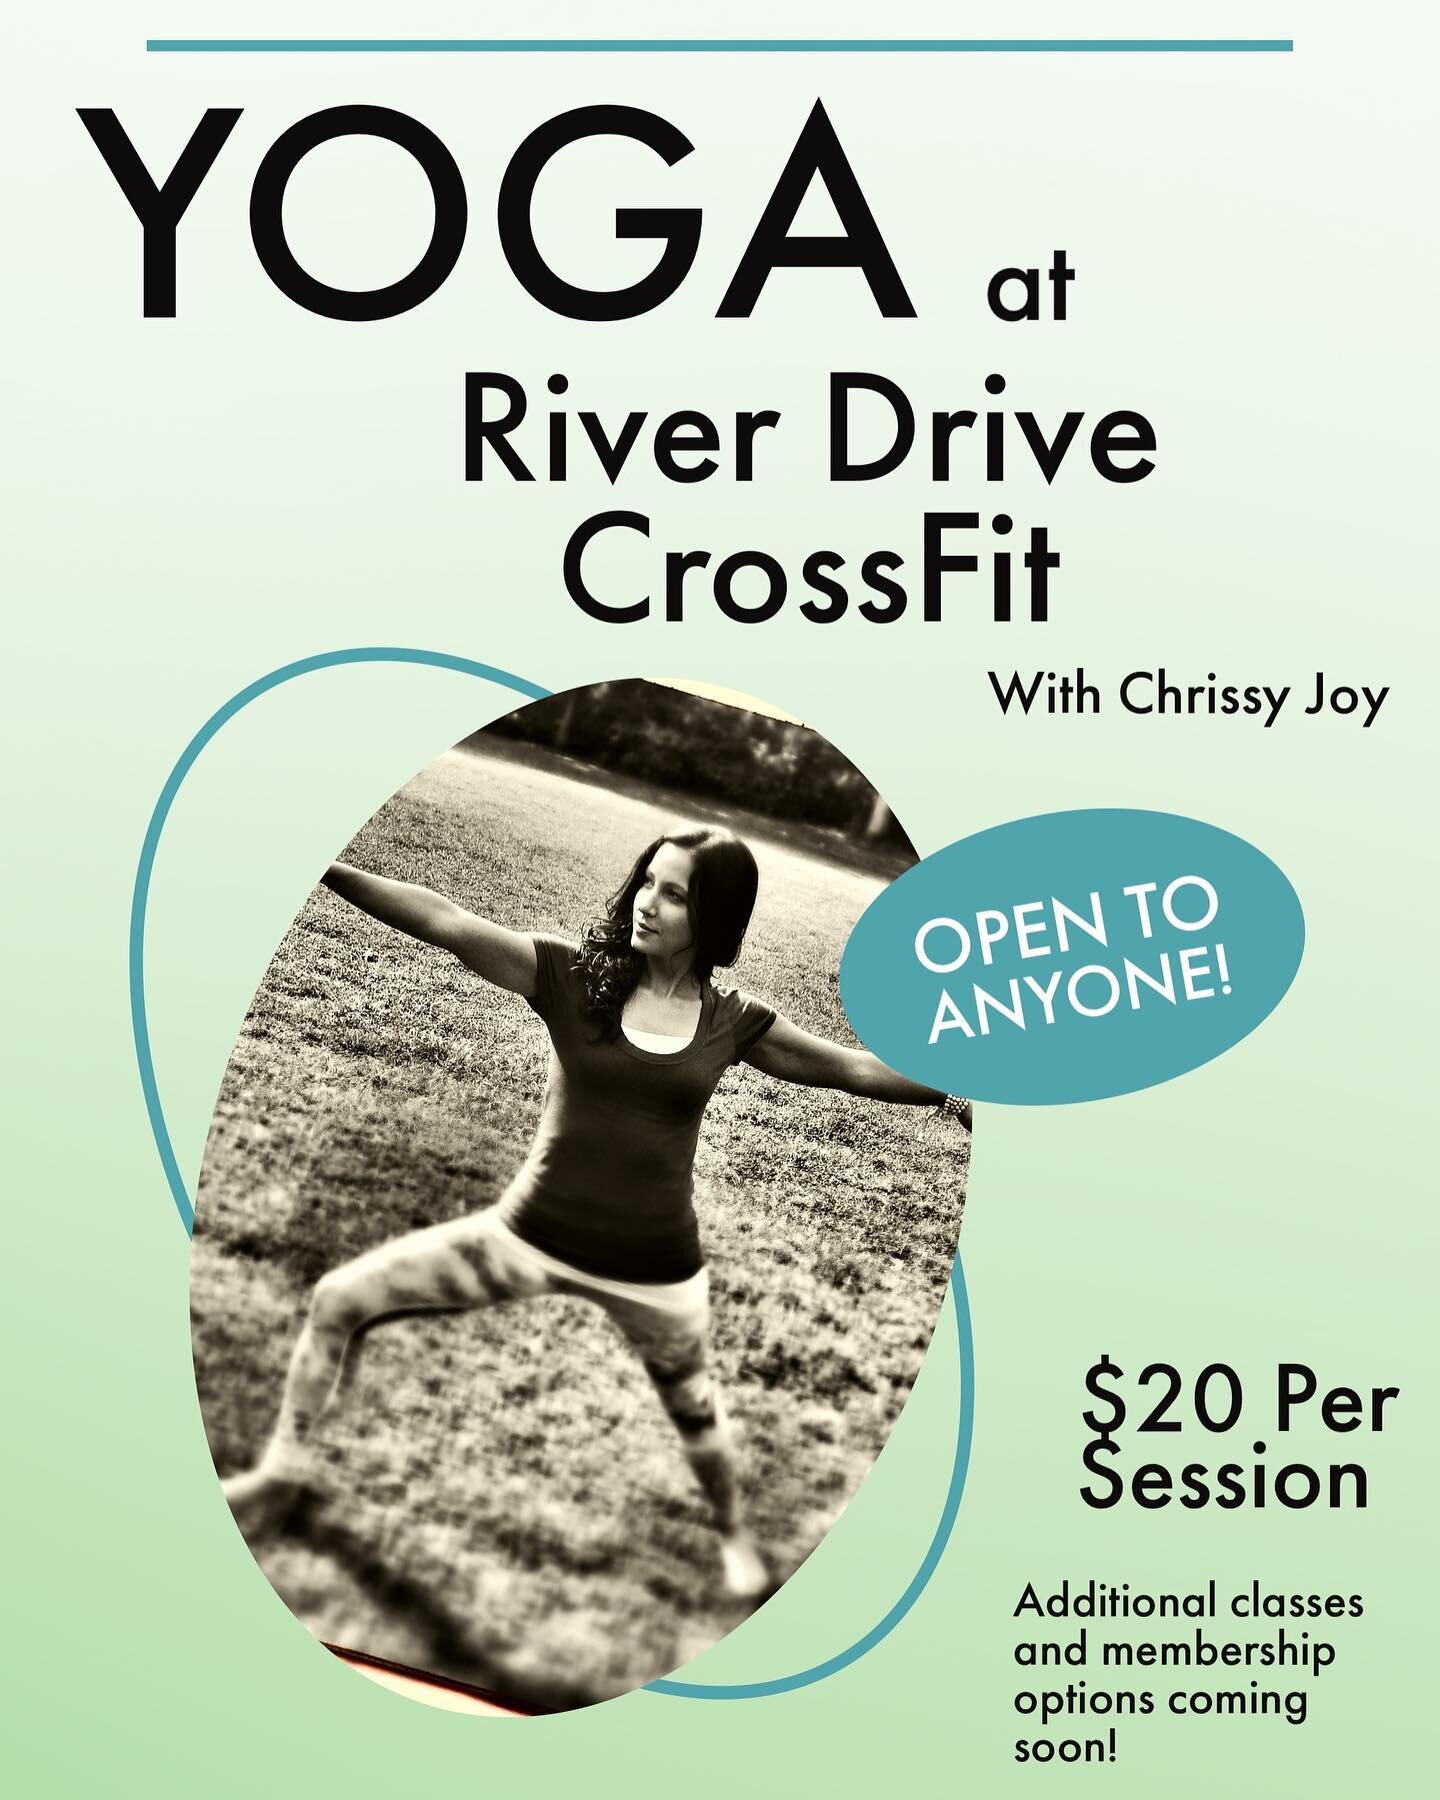 So excited and honored to be teaching @riverdrivecrossfit starting in March!! 

Starting March 8th, join me Wednesdays at 1:00pm-2:00pm for a Slow Flow Yoga Class that is good for all levels! 

DM or go to www.riverdrivecrossfit.com for more info! 

